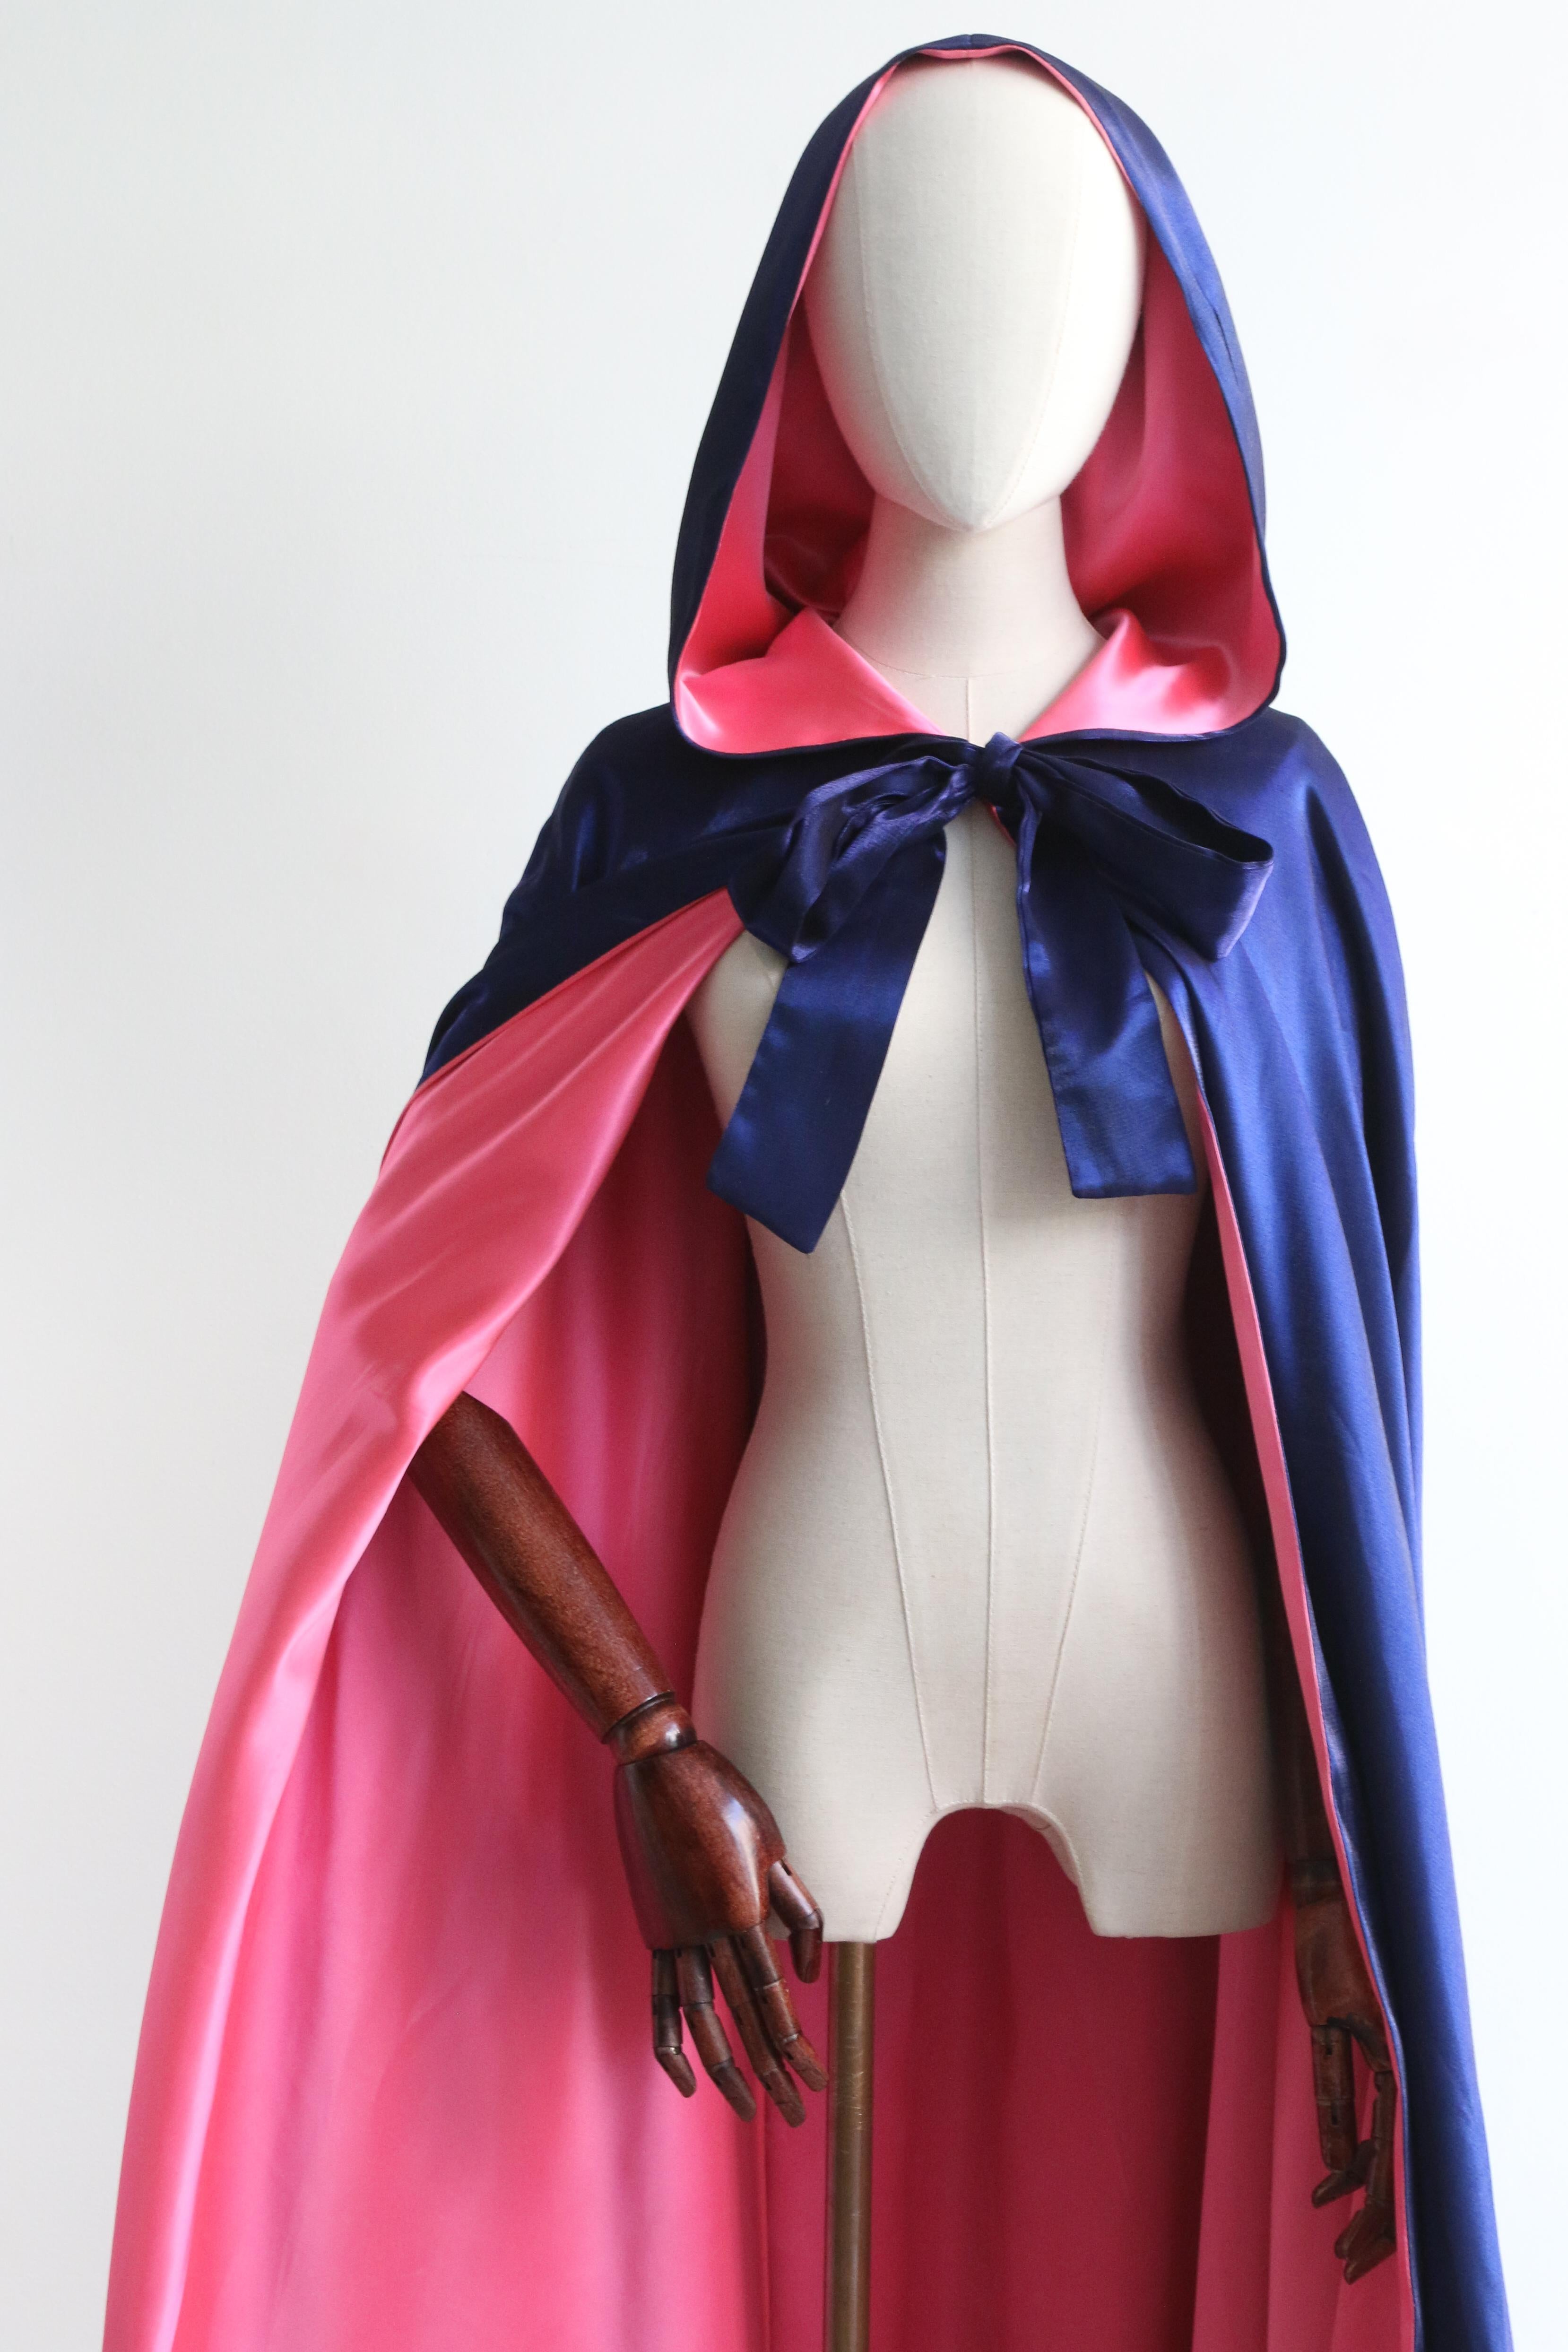 The most majestic and eye-catching cape you could ever set your eyes upon. Rendered in a hot pink satin lining and a sparkling silk midnight blue outer-layer, this 1950's evening cape is the perfect statement to your evening wardrobe.  

The simple